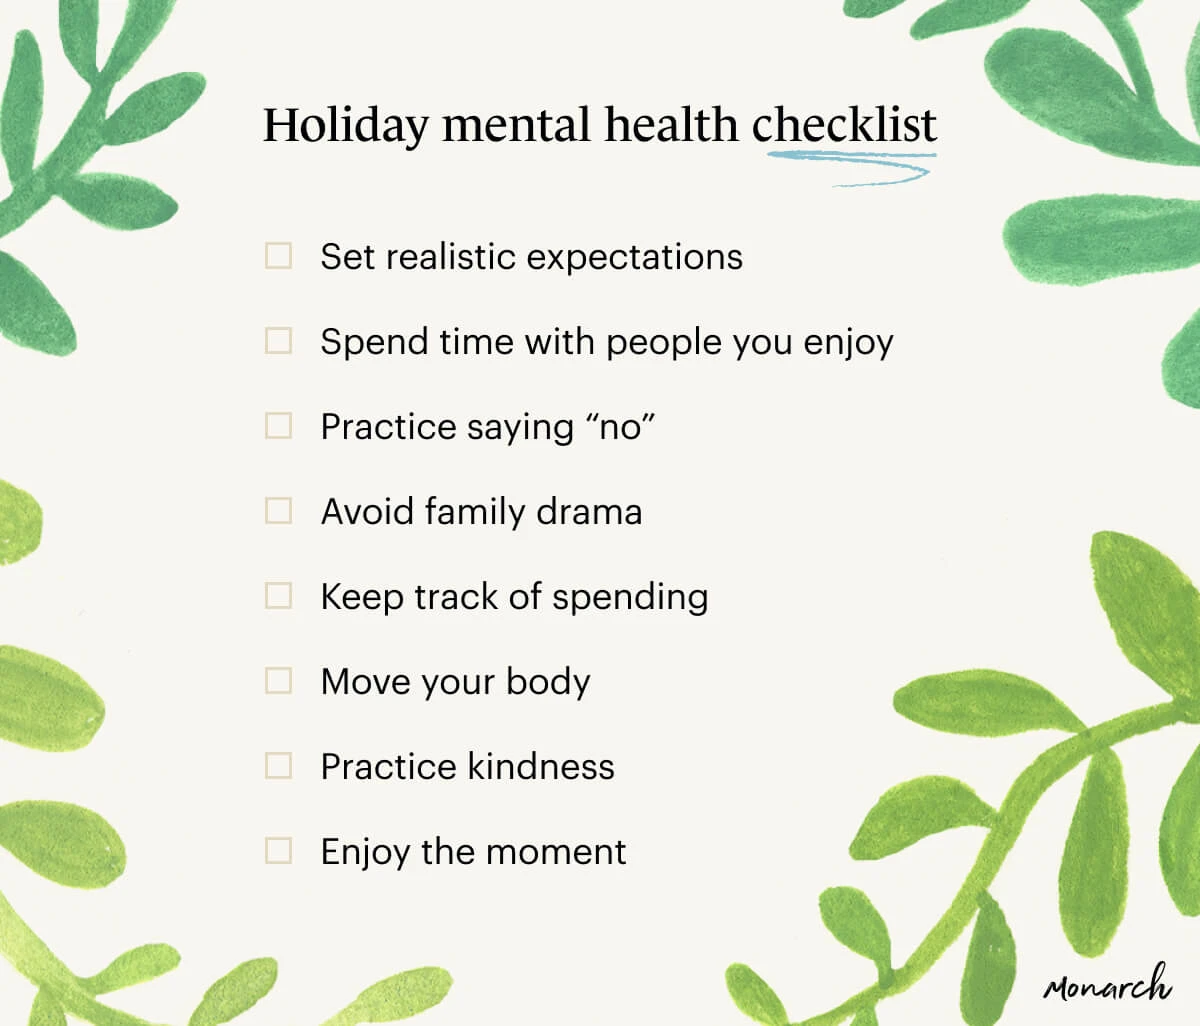 Checklist with tips for avoiding common stressors during the holidays